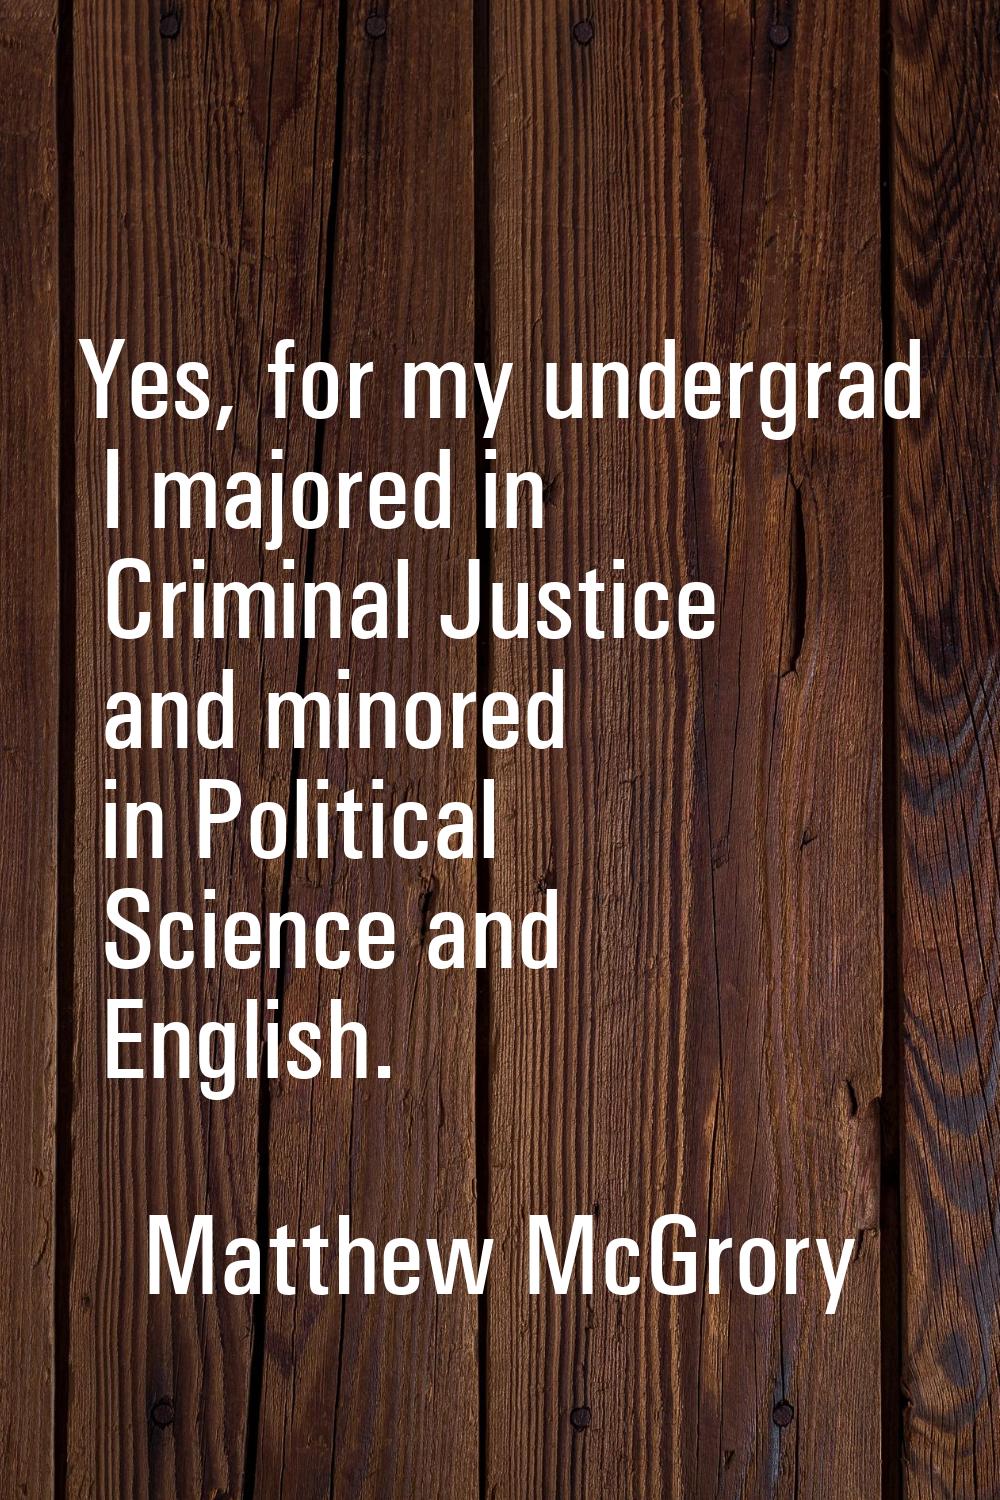 Yes, for my undergrad I majored in Criminal Justice and minored in Political Science and English.